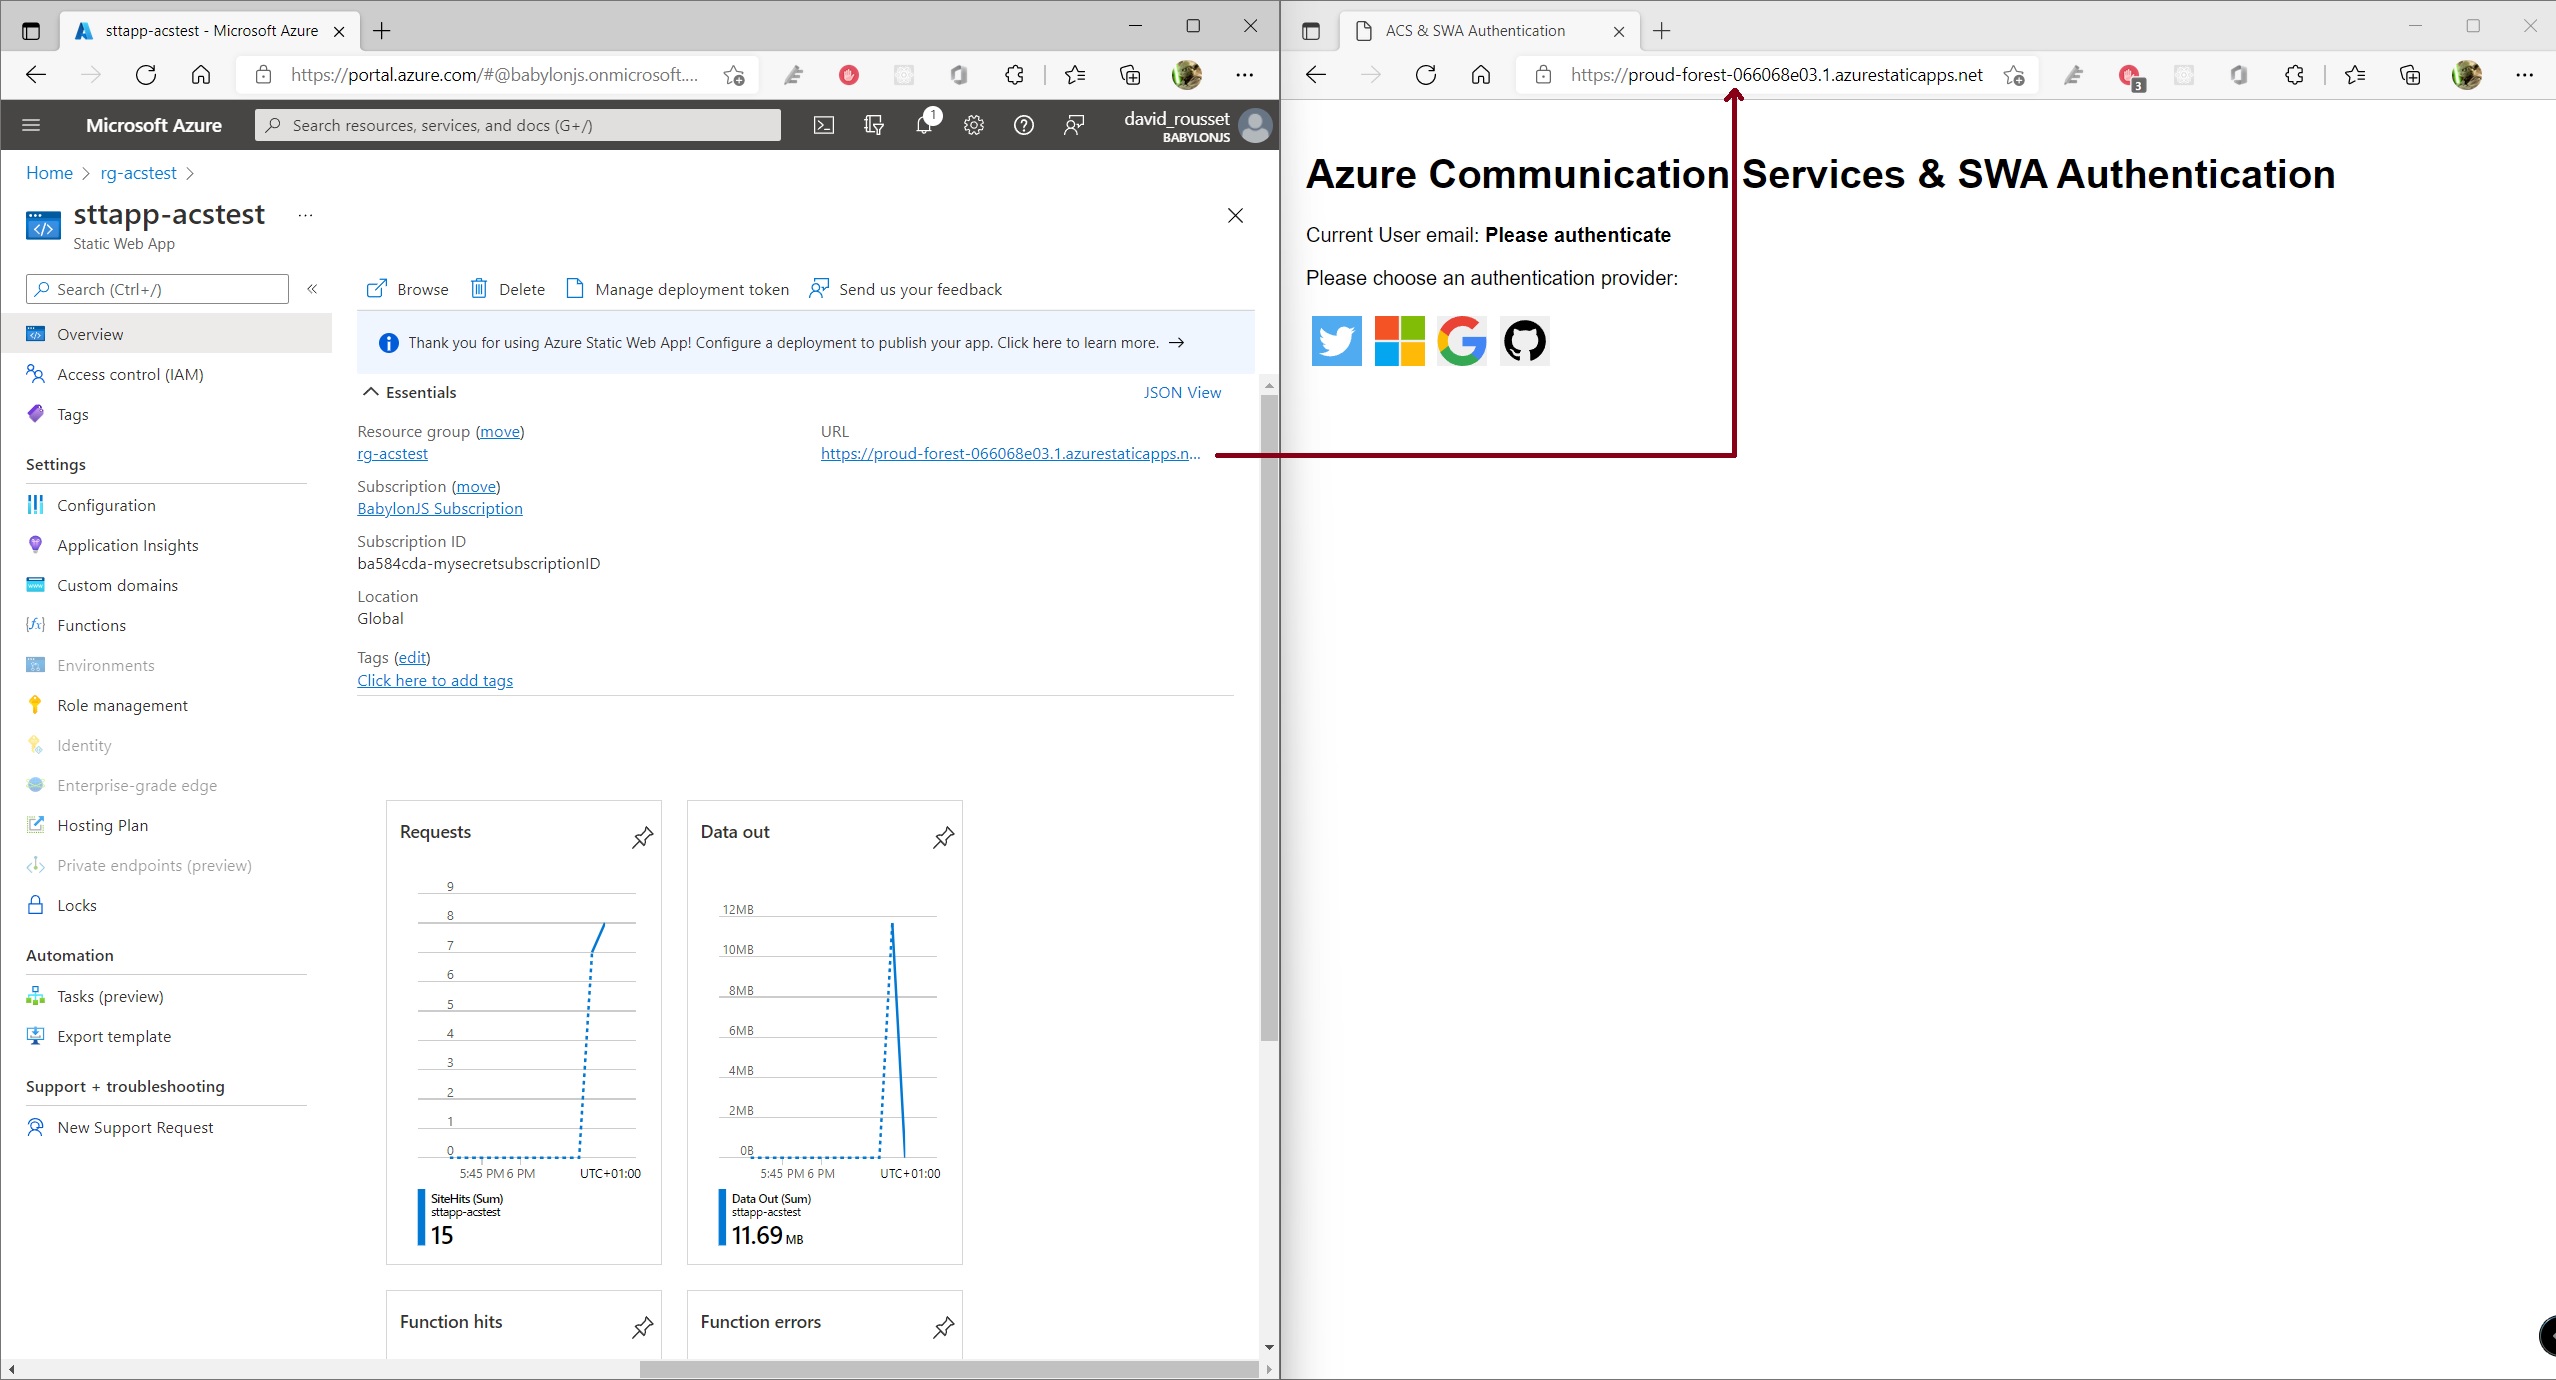 Navigating to the URL of the Static Web App from the Azure Portal